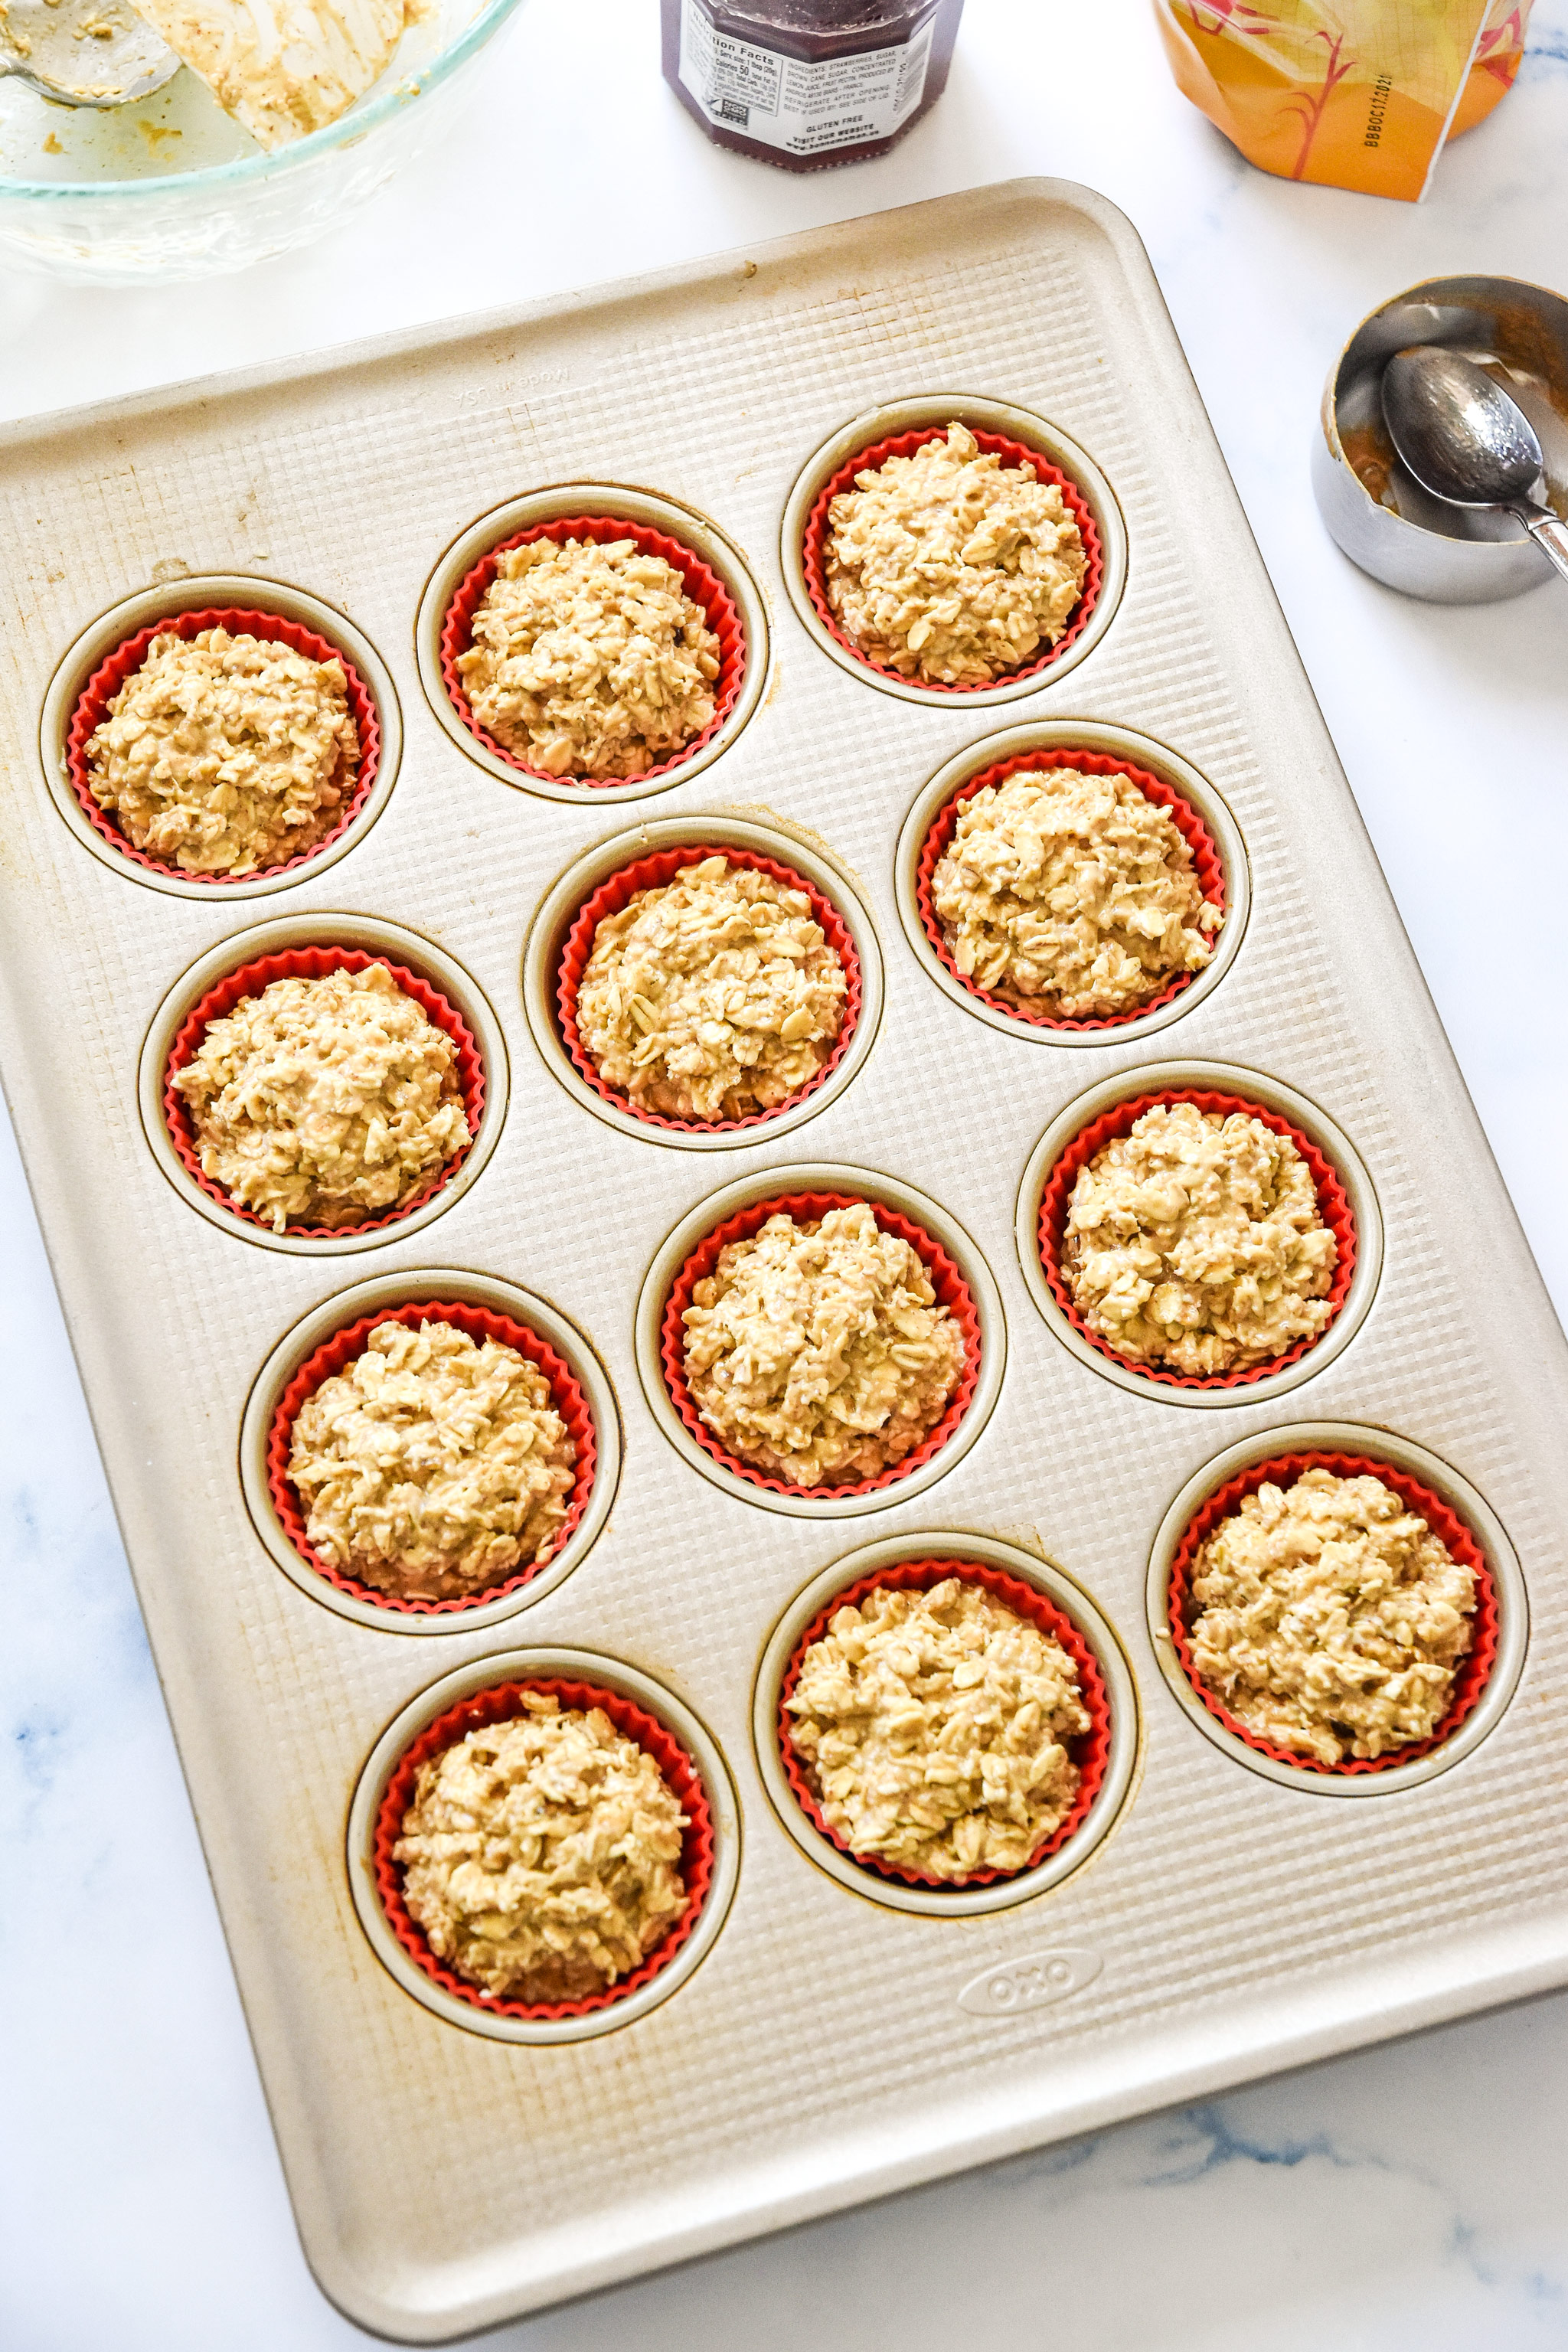 before baking the tray of oatmeal cups ready to go in the oven.